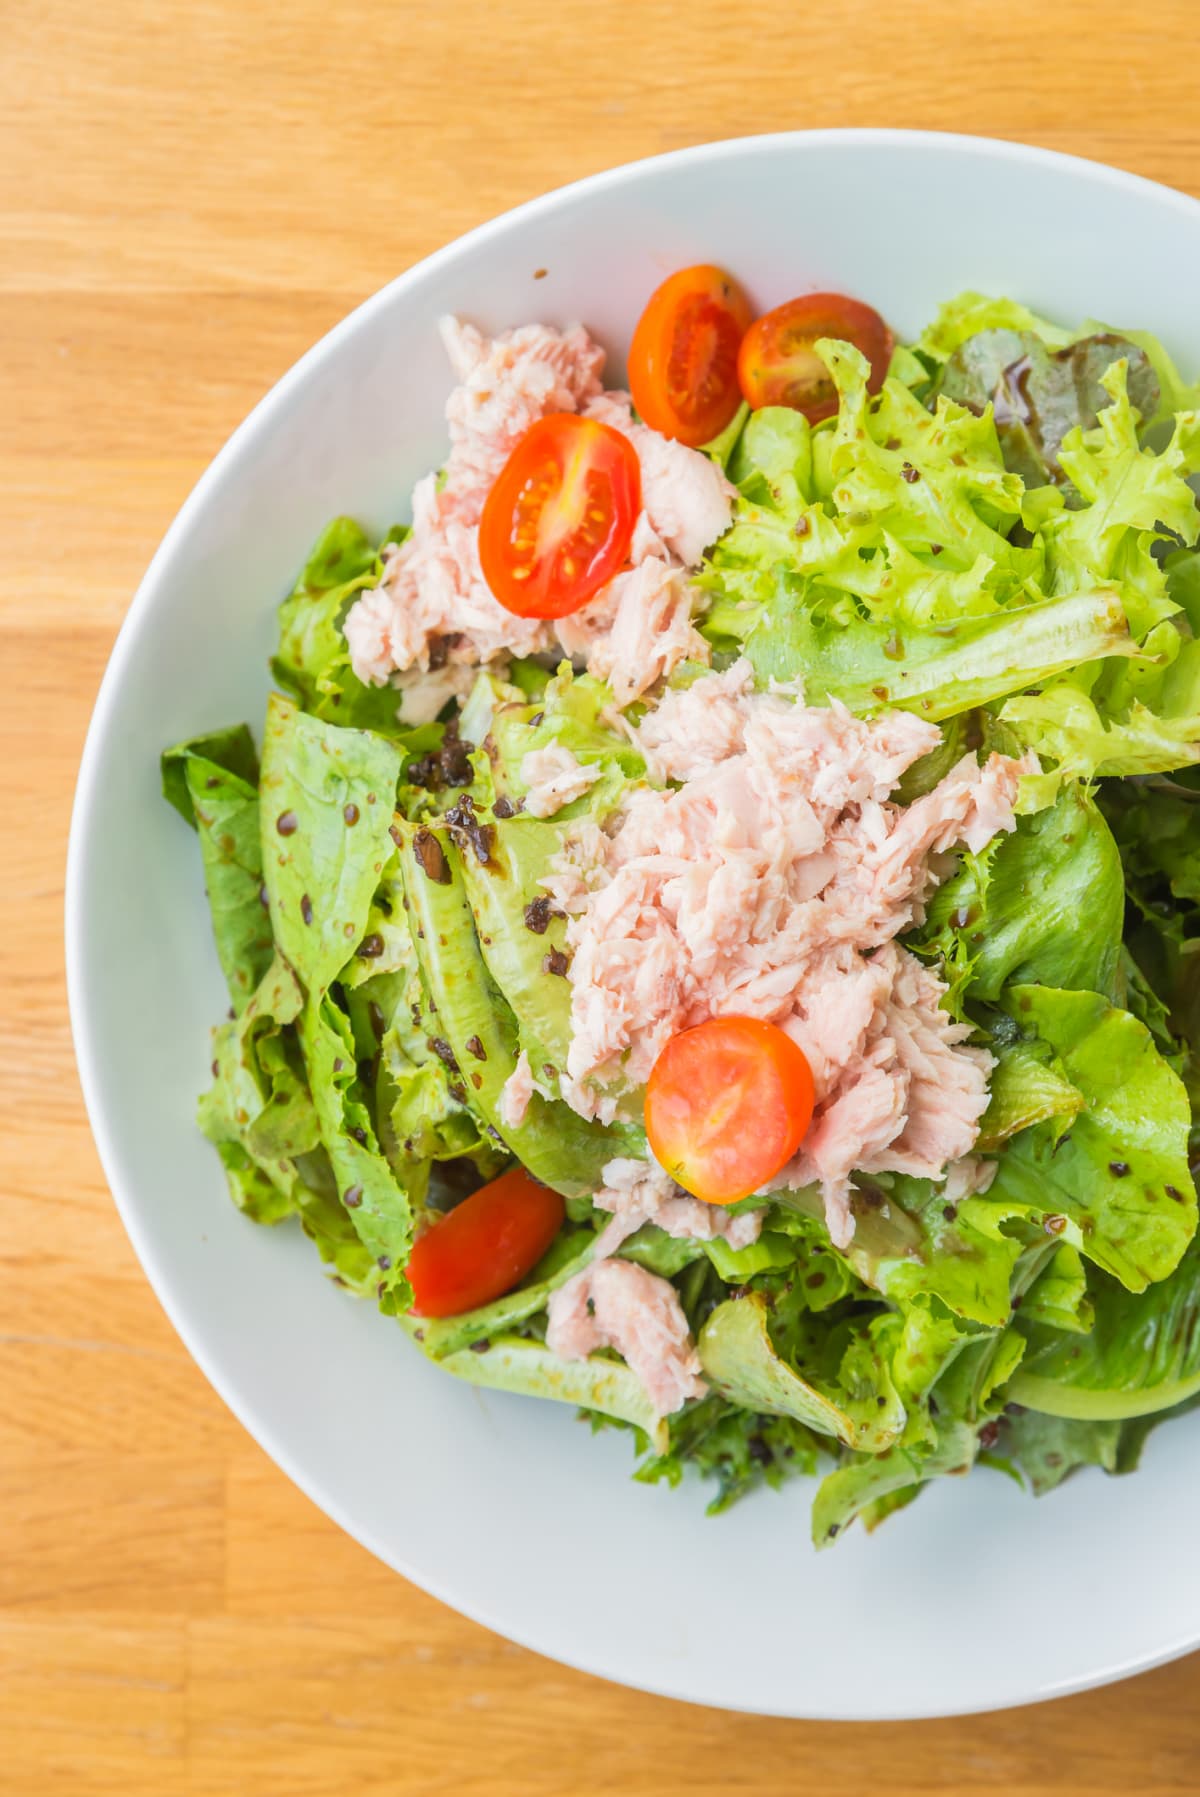 A tuna salad on a bed of green salad with tomatoes